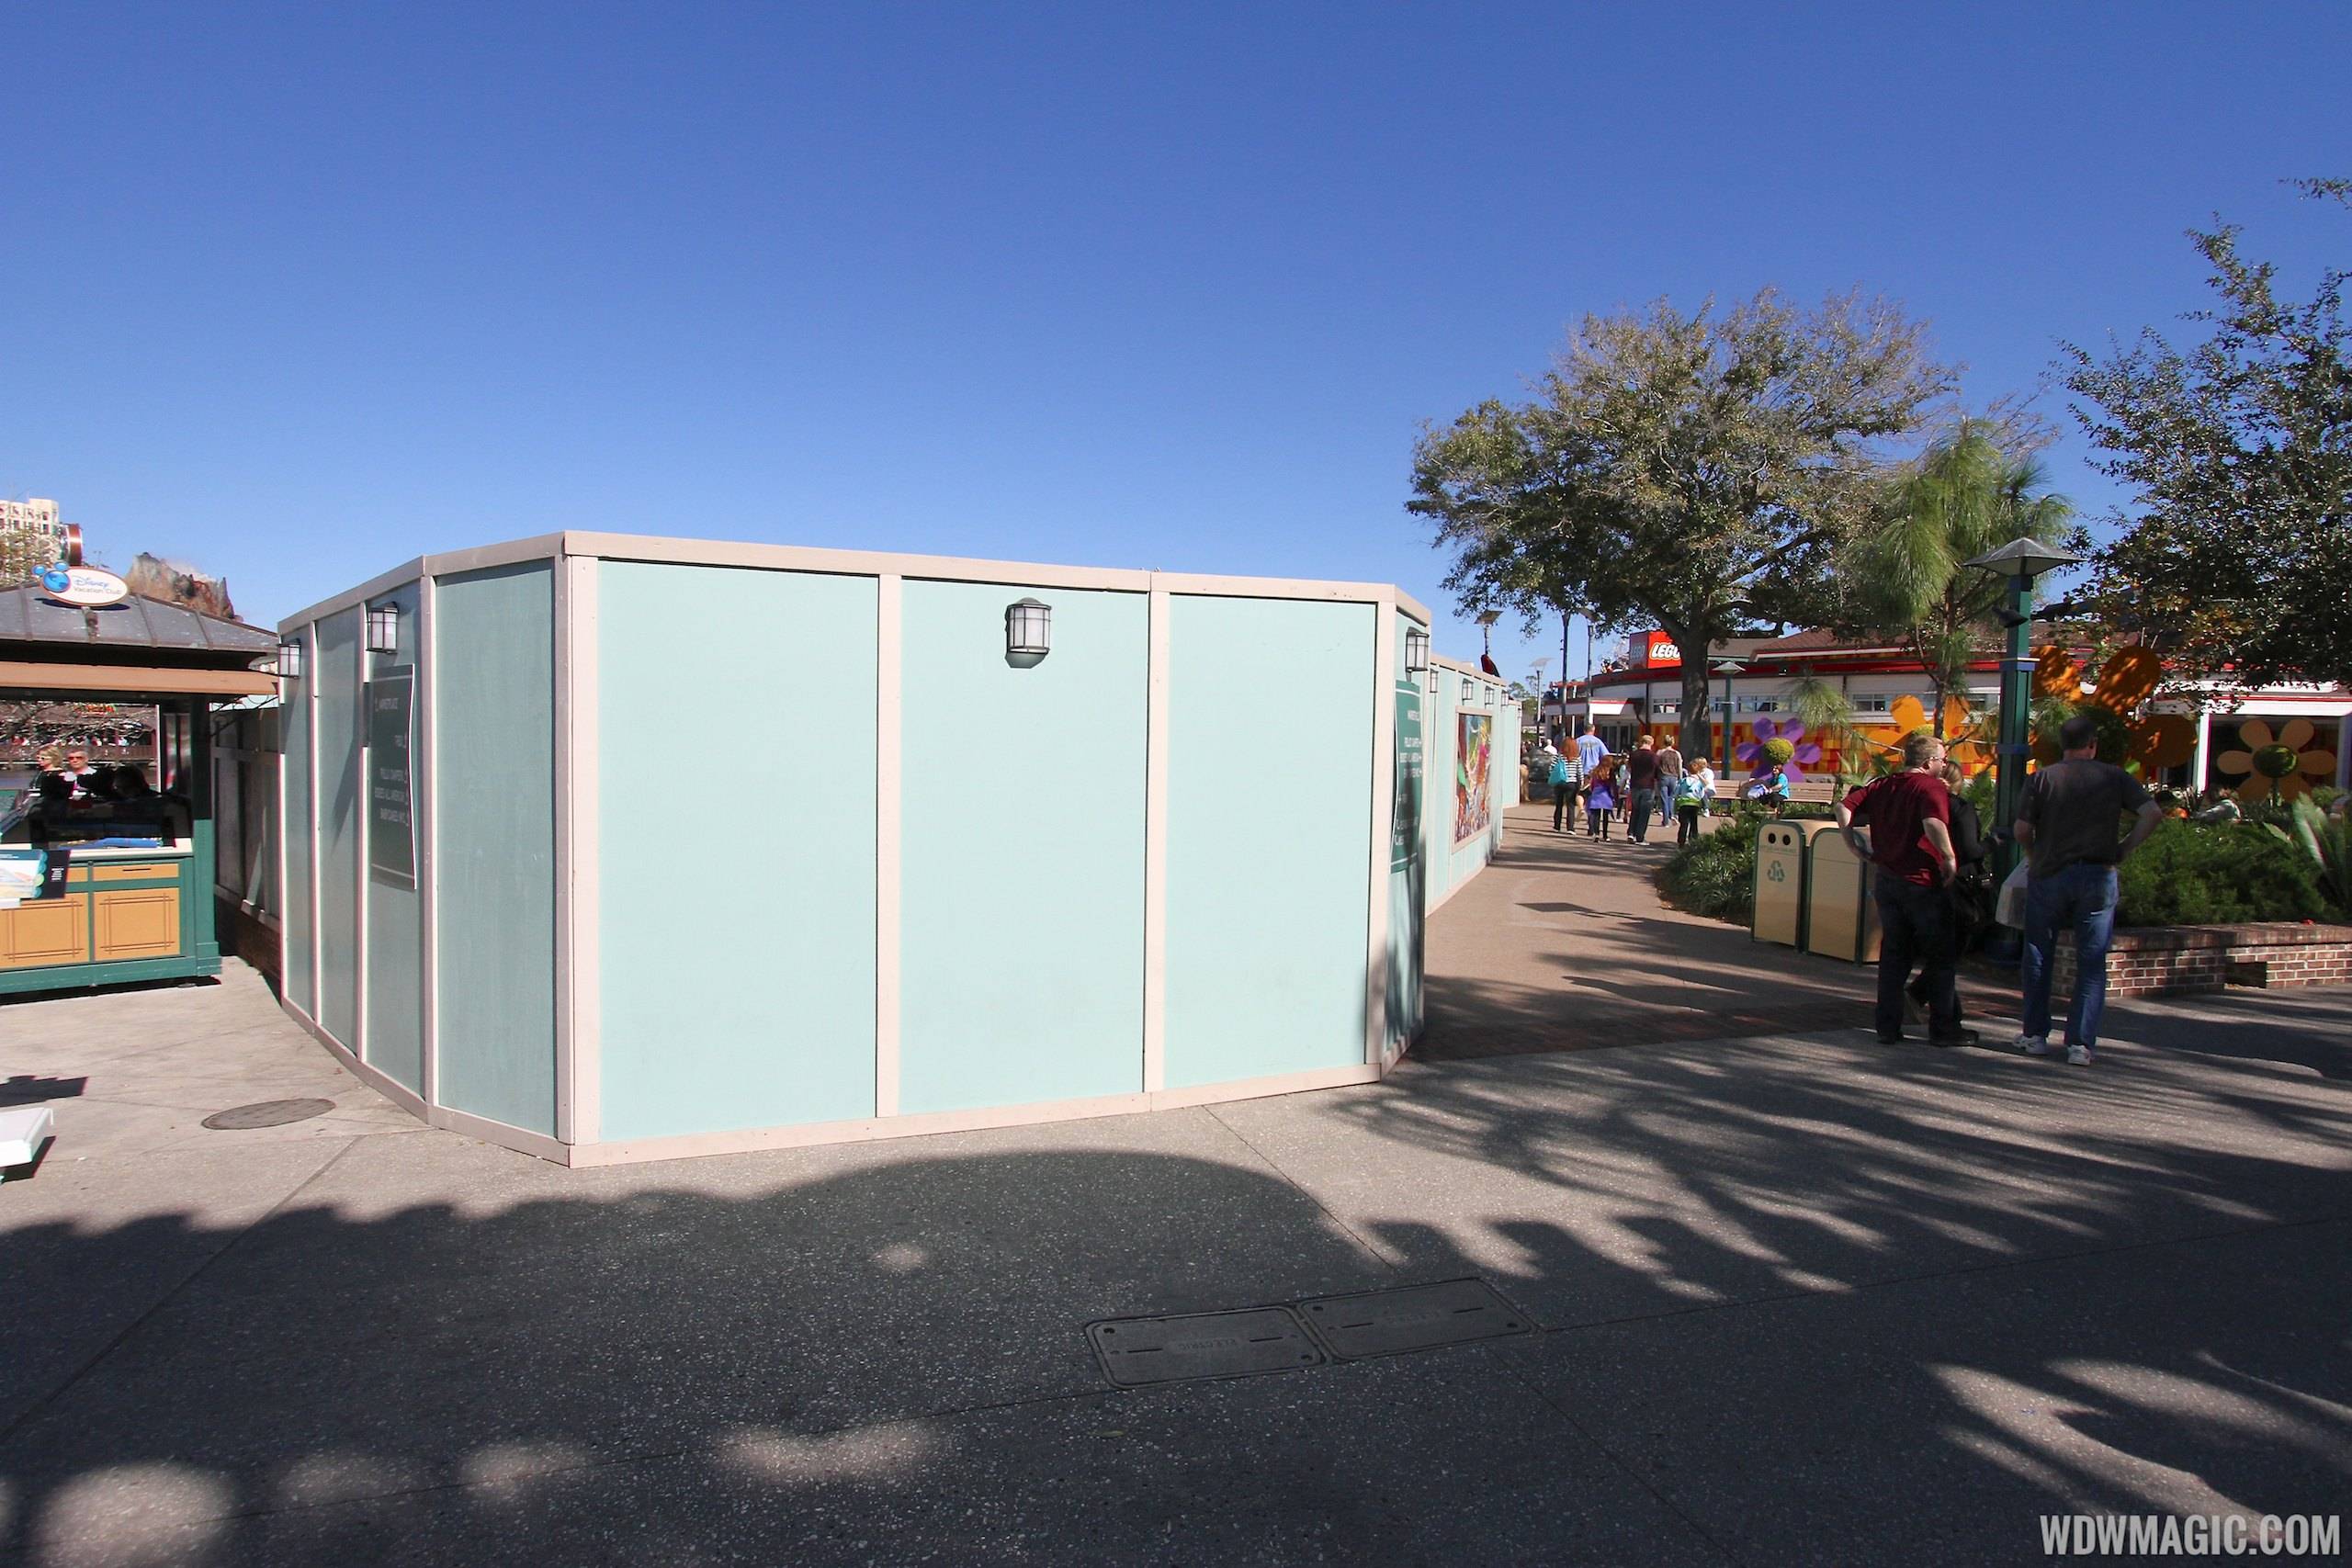 PHOTOS - More construction walls go up in Downtown Disney Marketplace for Disney Springs developments